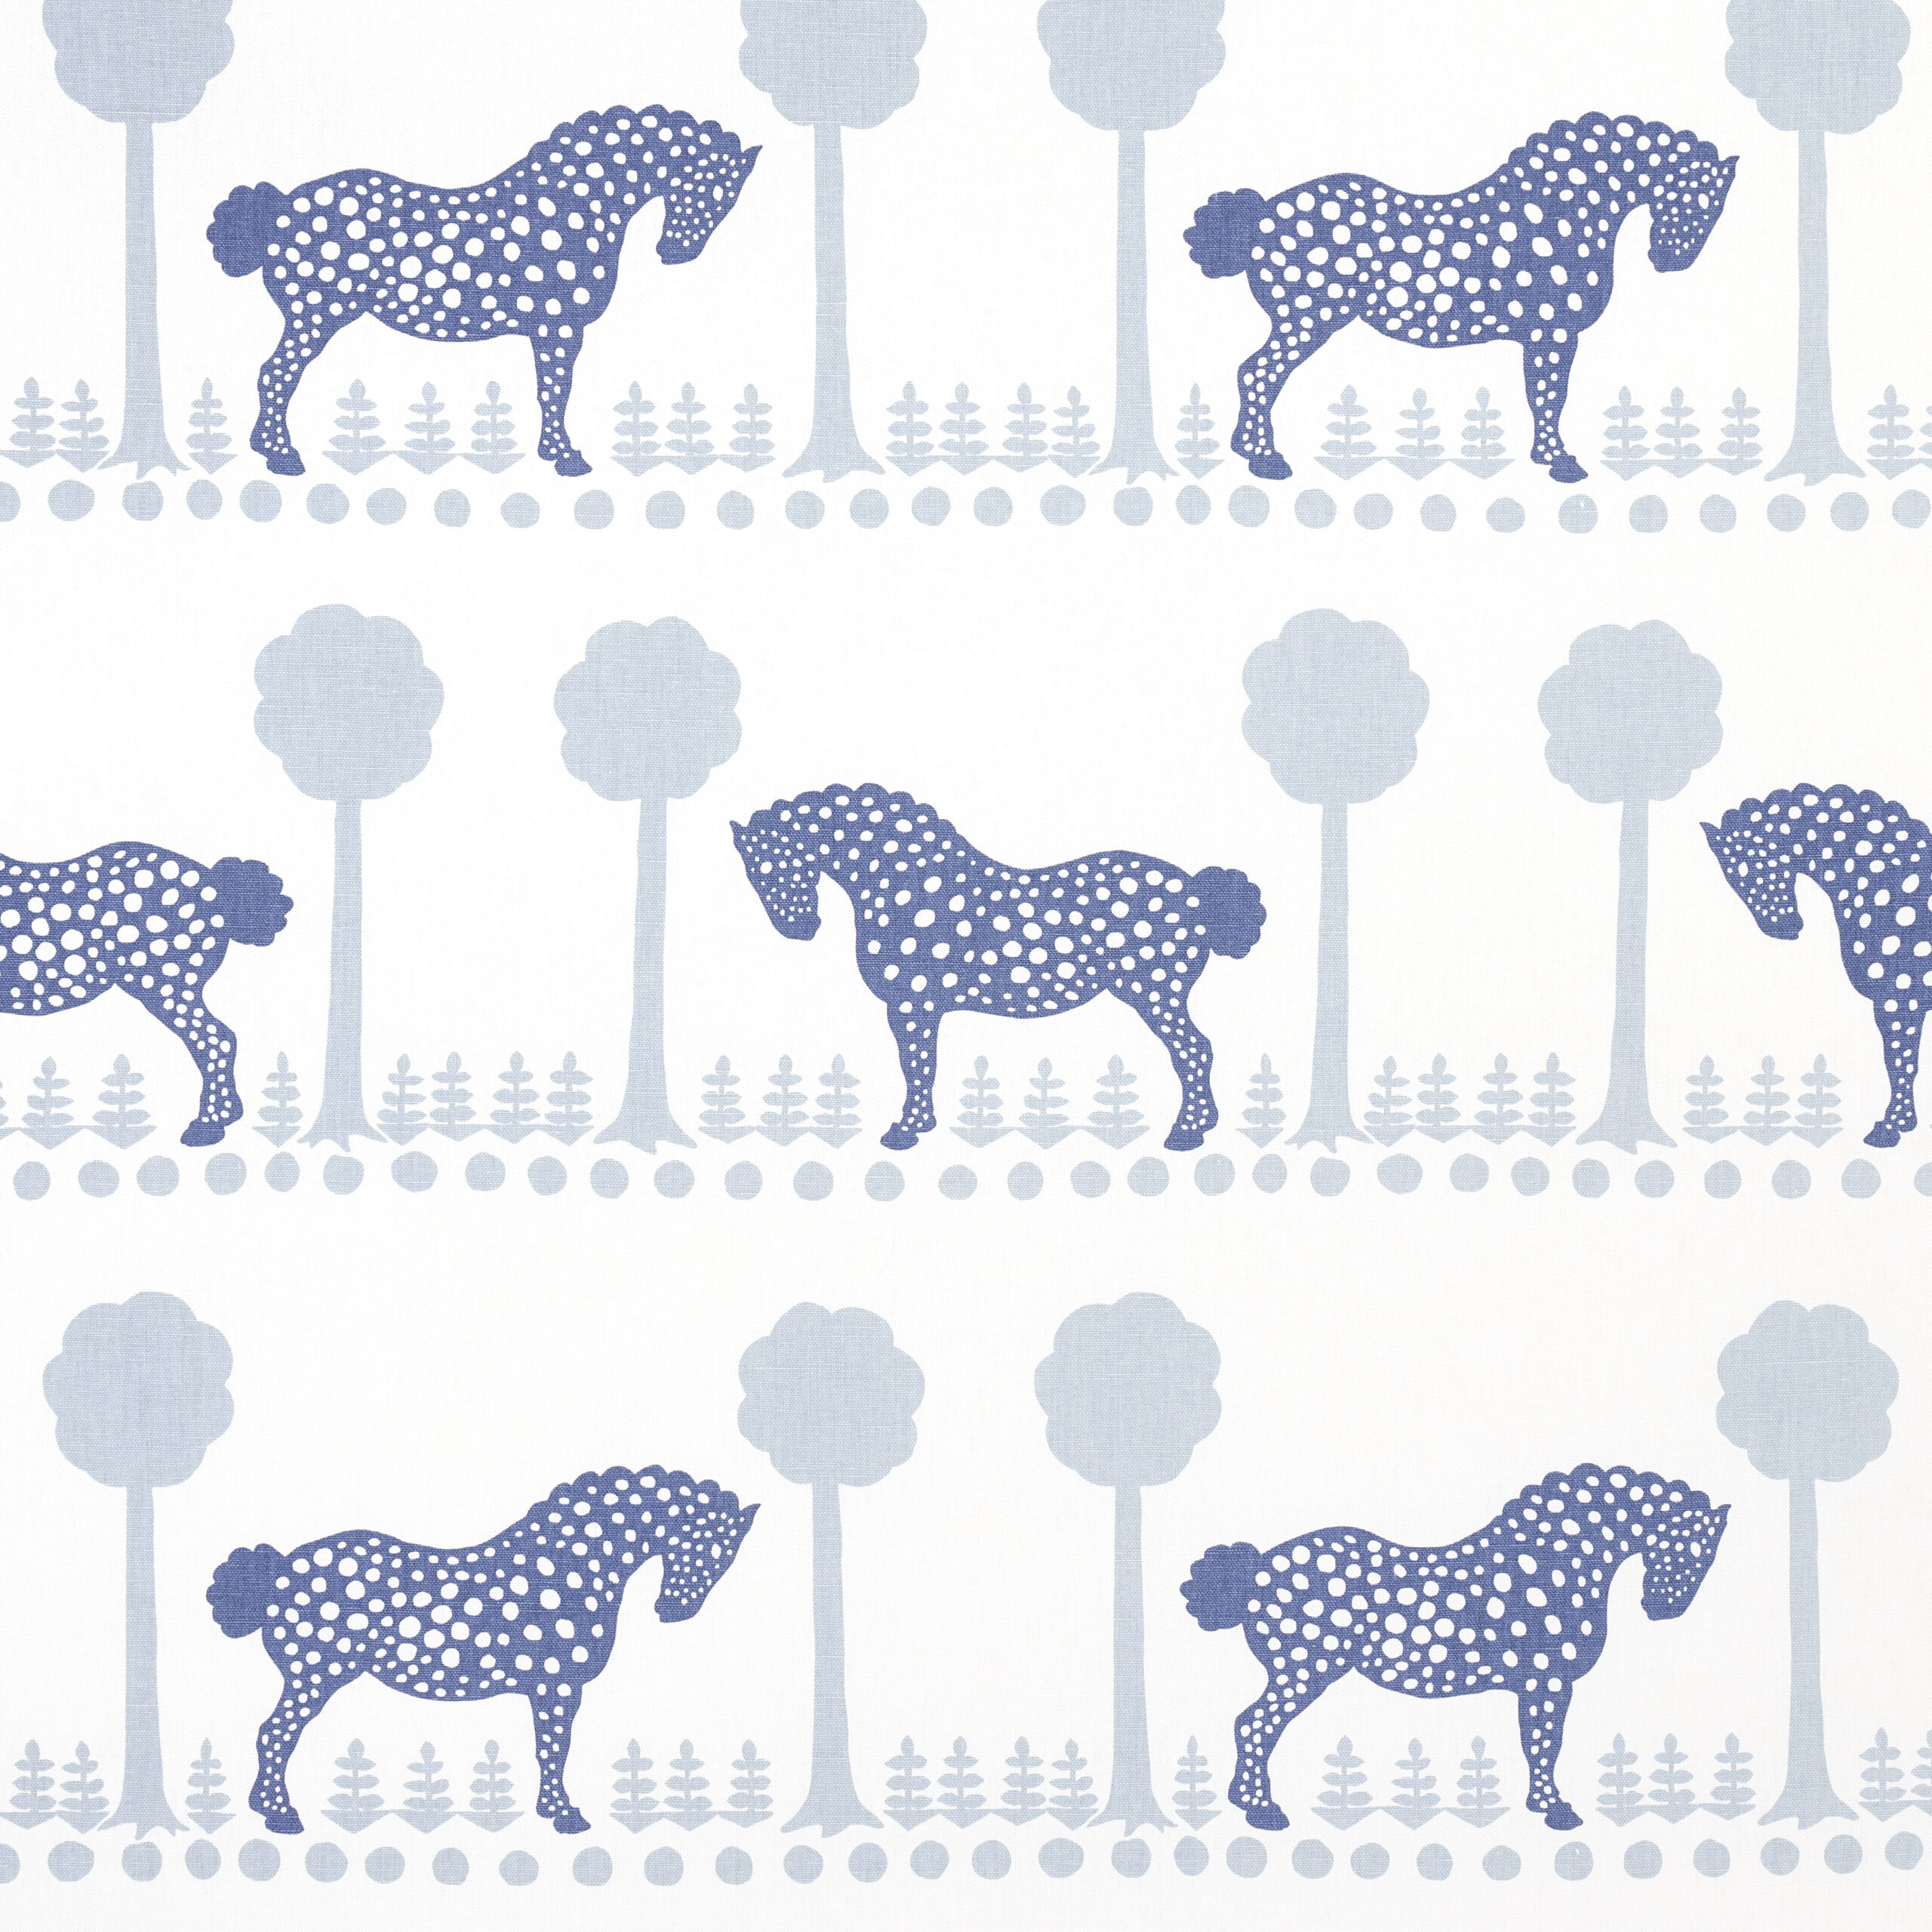 Schumacher Polka Dot Pony Fabric in Blue, from the Folly Cove collection